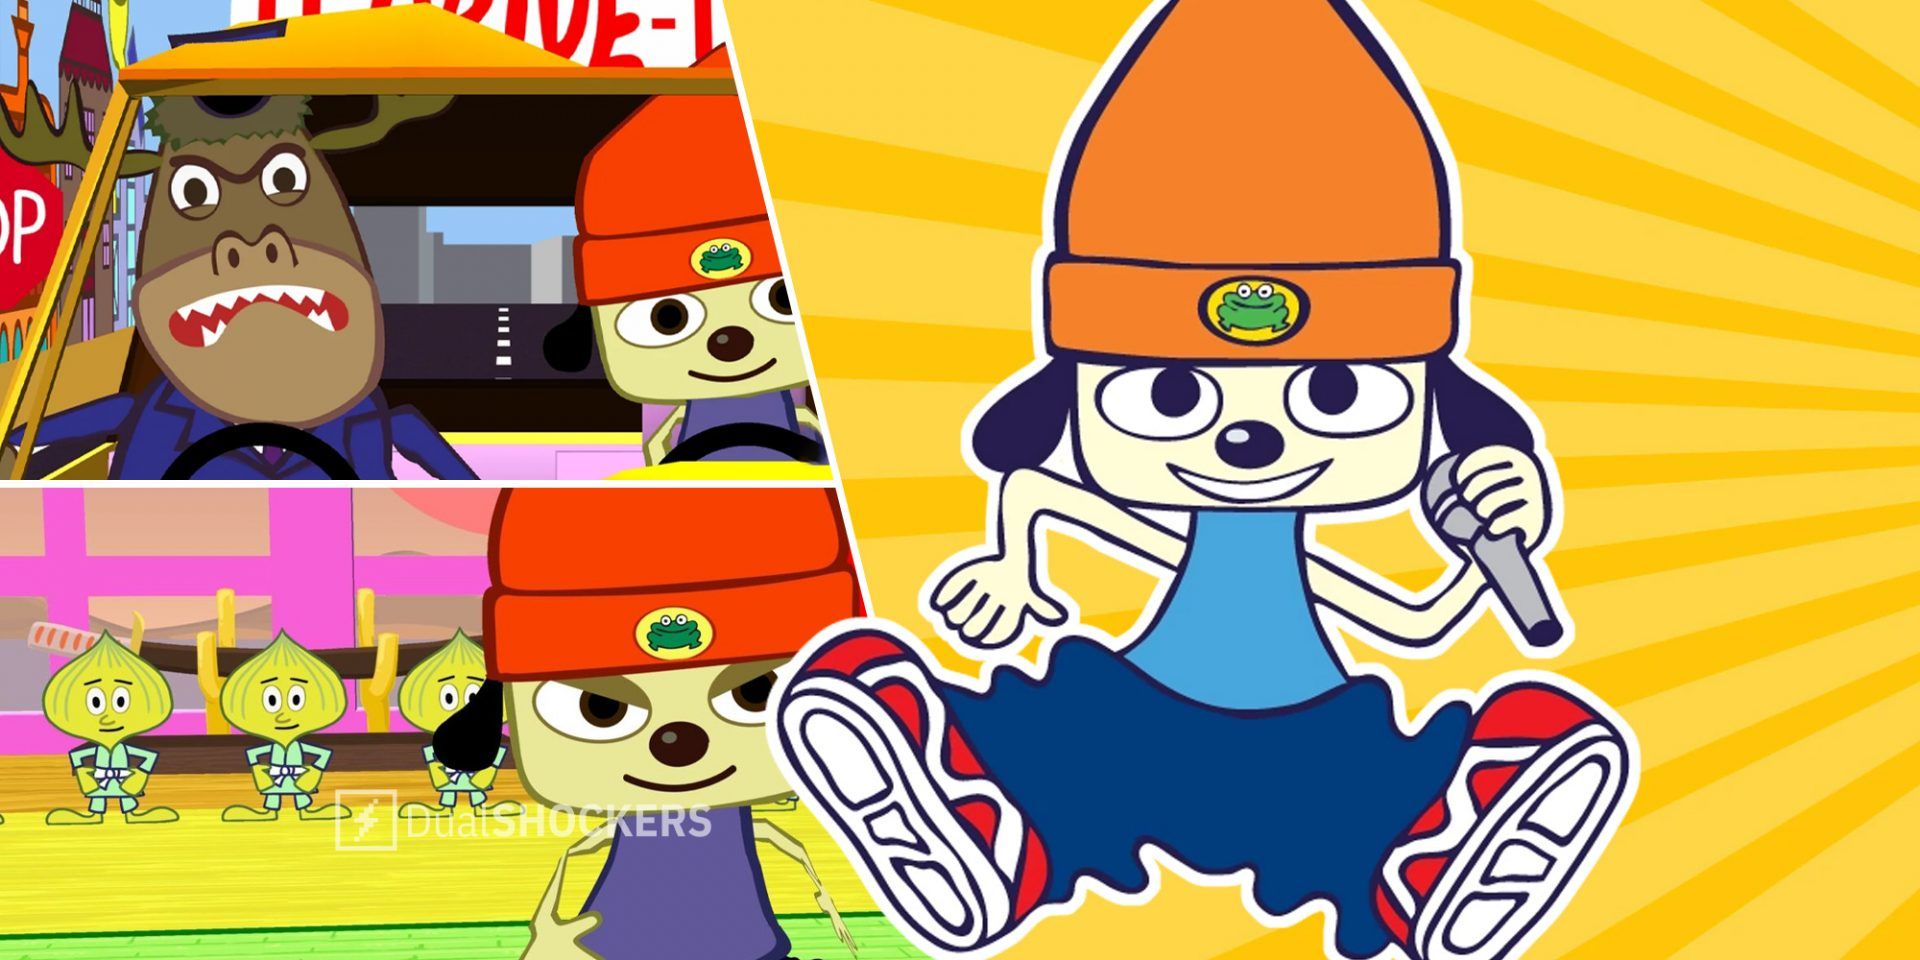 Parappa The Rapper gameplay and promo image